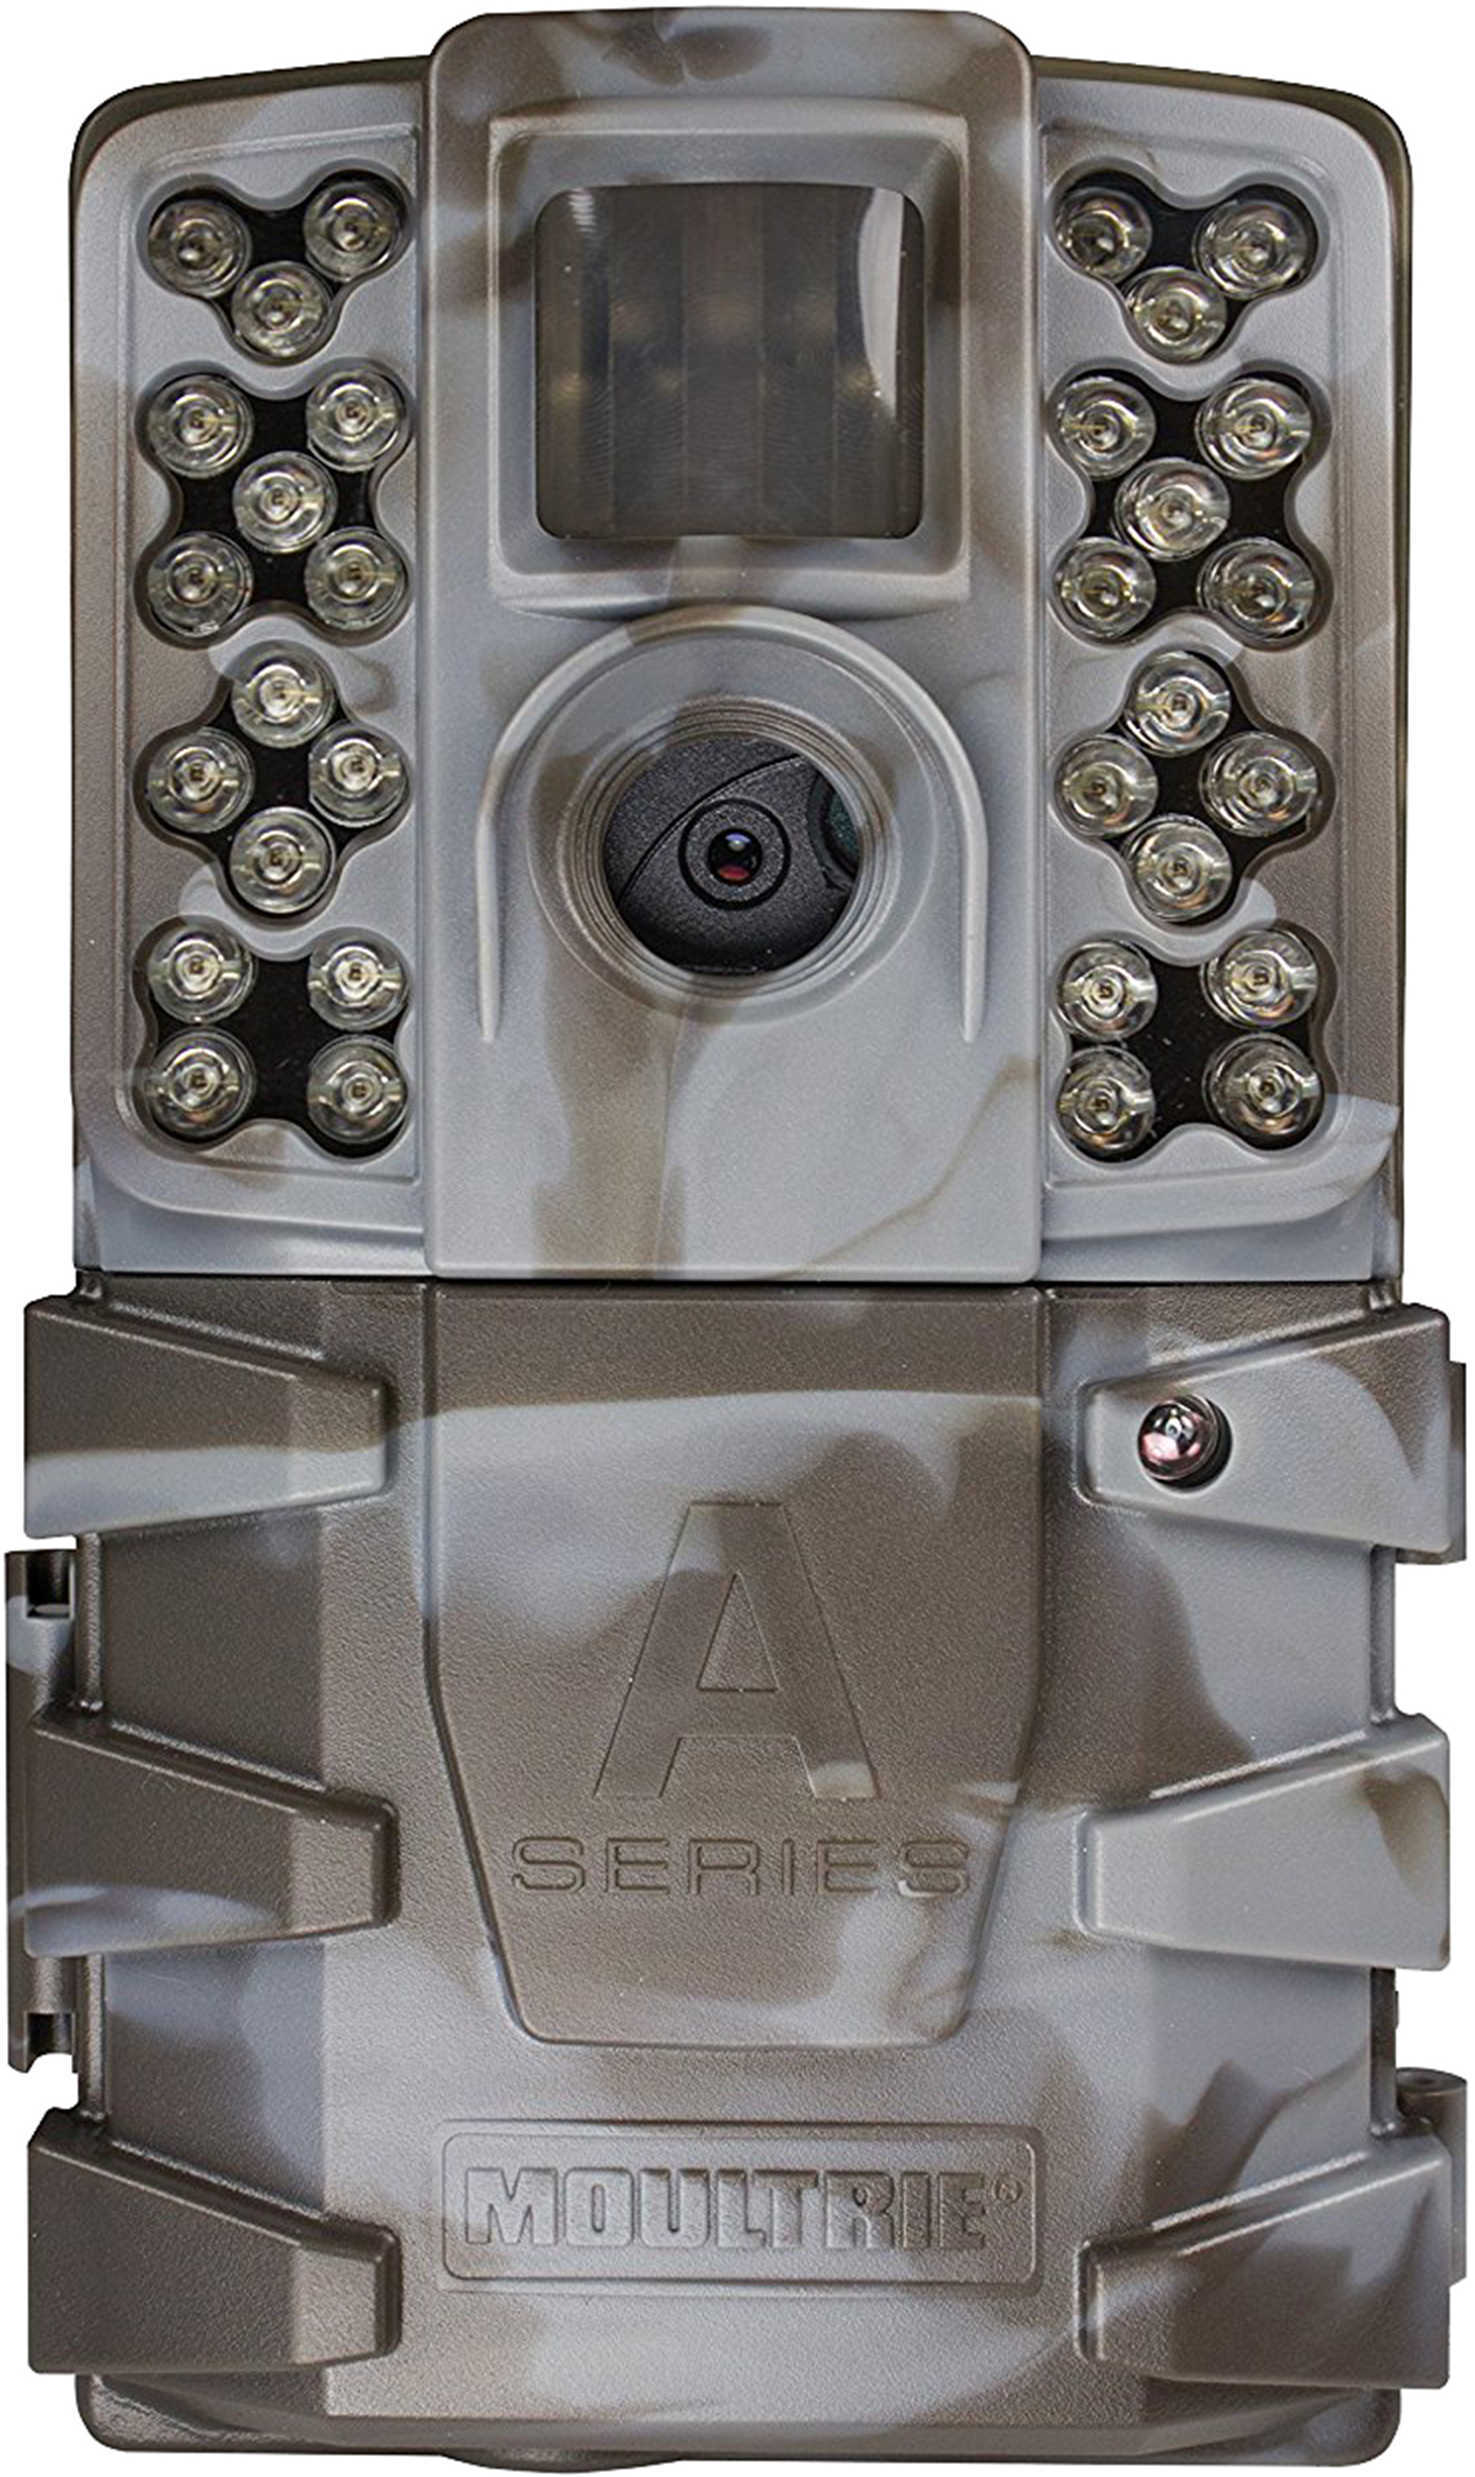 Moultrie Game Camera A-35 Model: MCG-13212